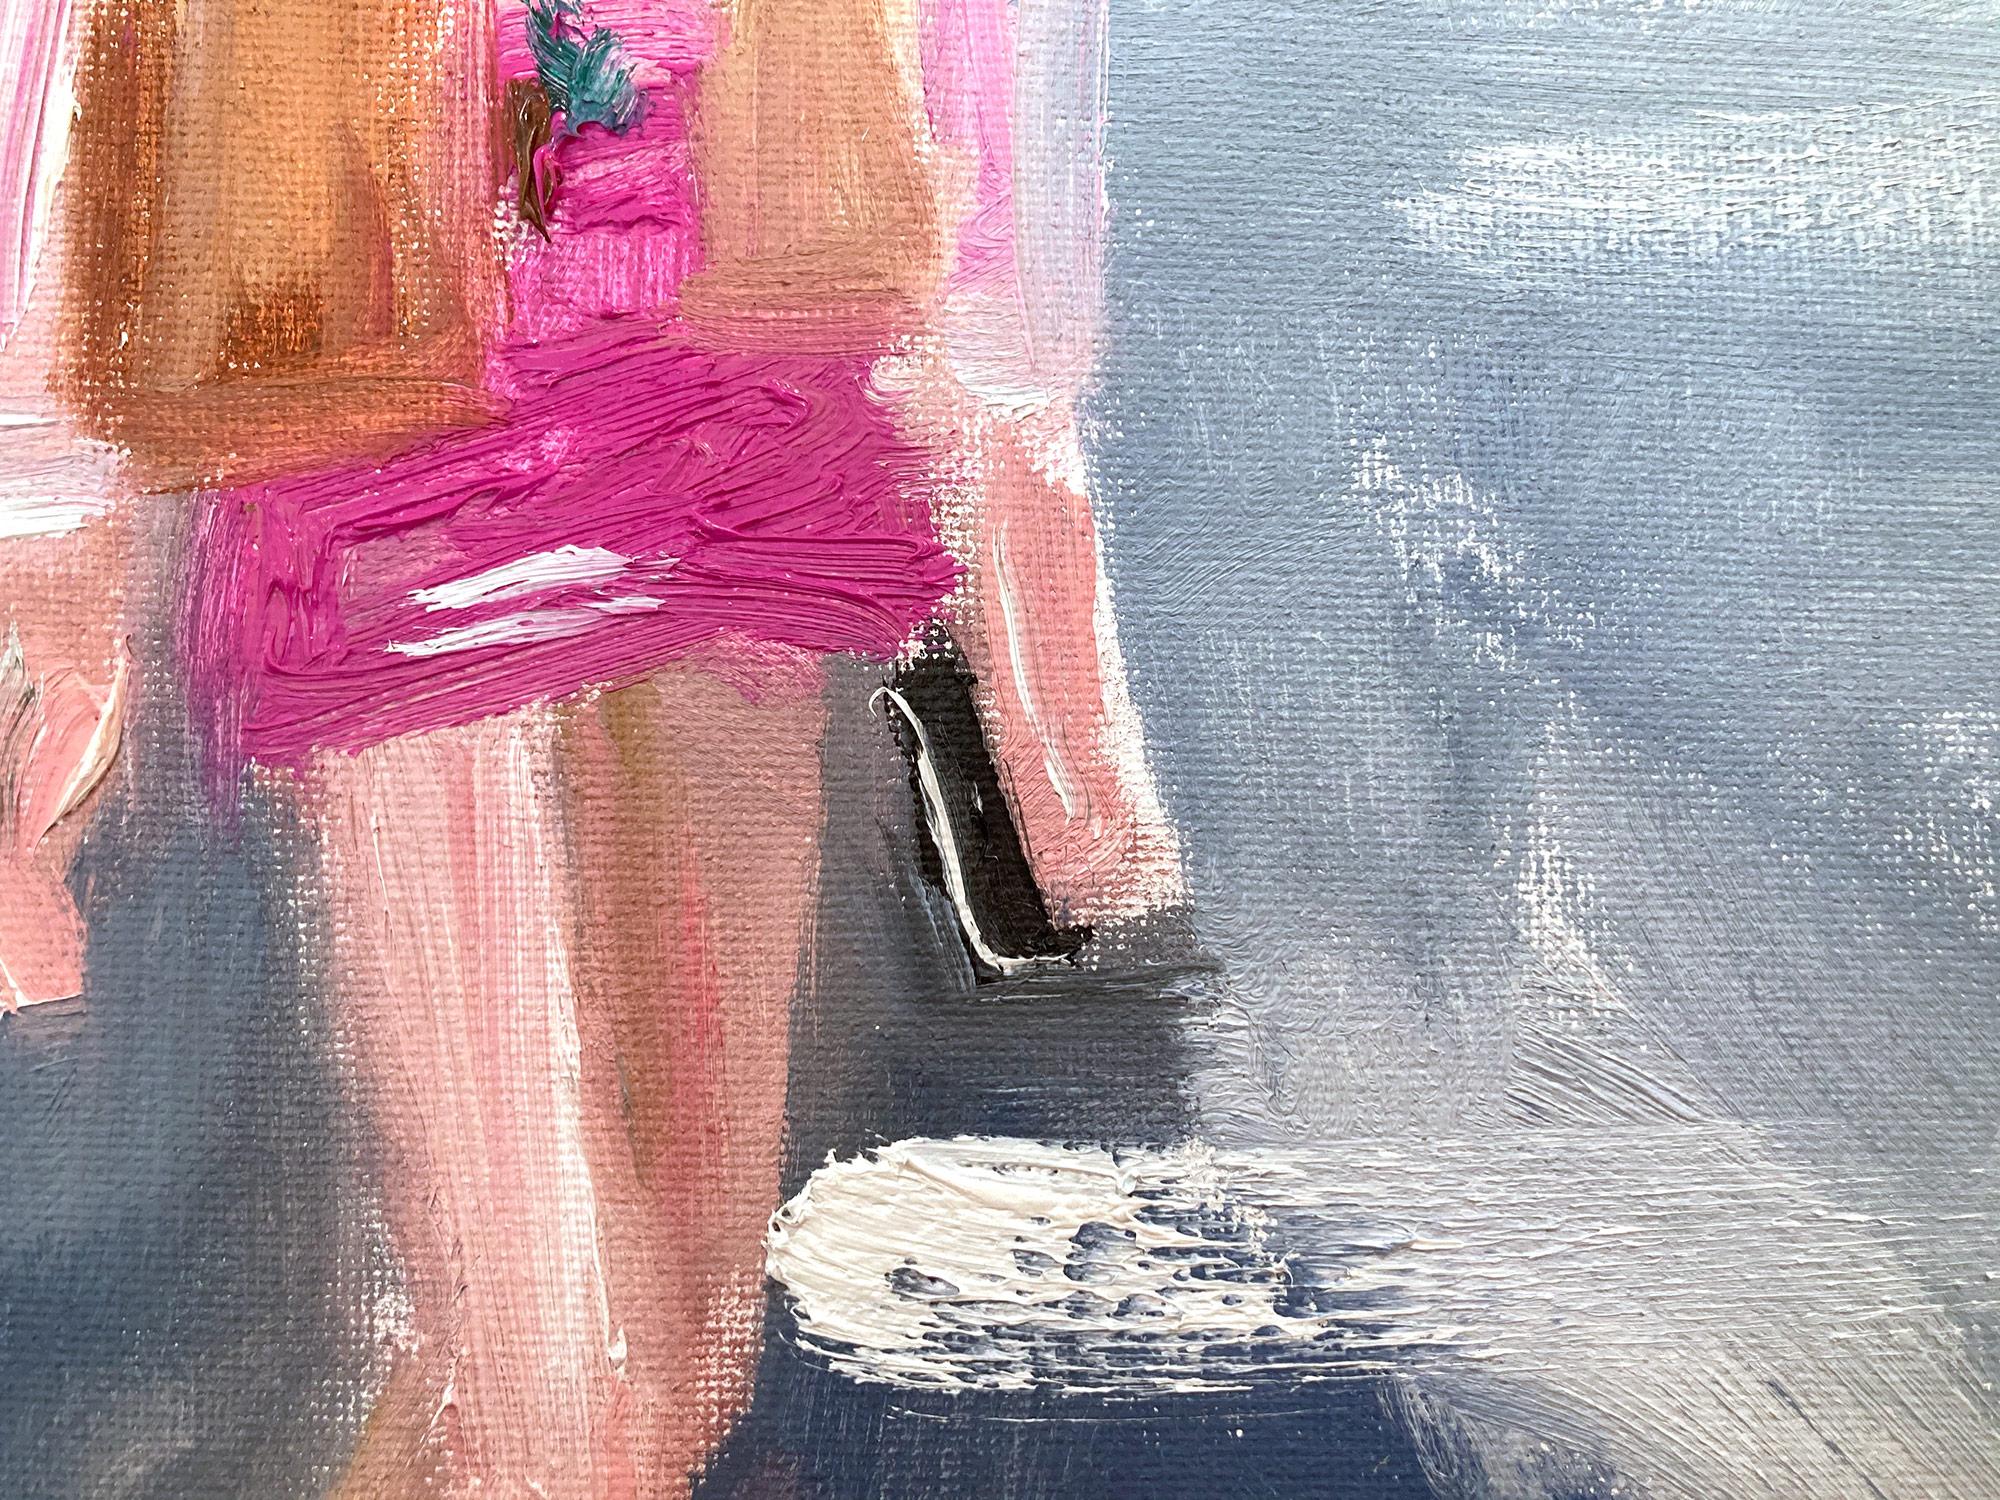 „Stepping Out - Central Park“ Figur, die Chanel trägt, Ölgemälde auf Leinwand (Grau), Abstract Painting, von Cindy Shaoul